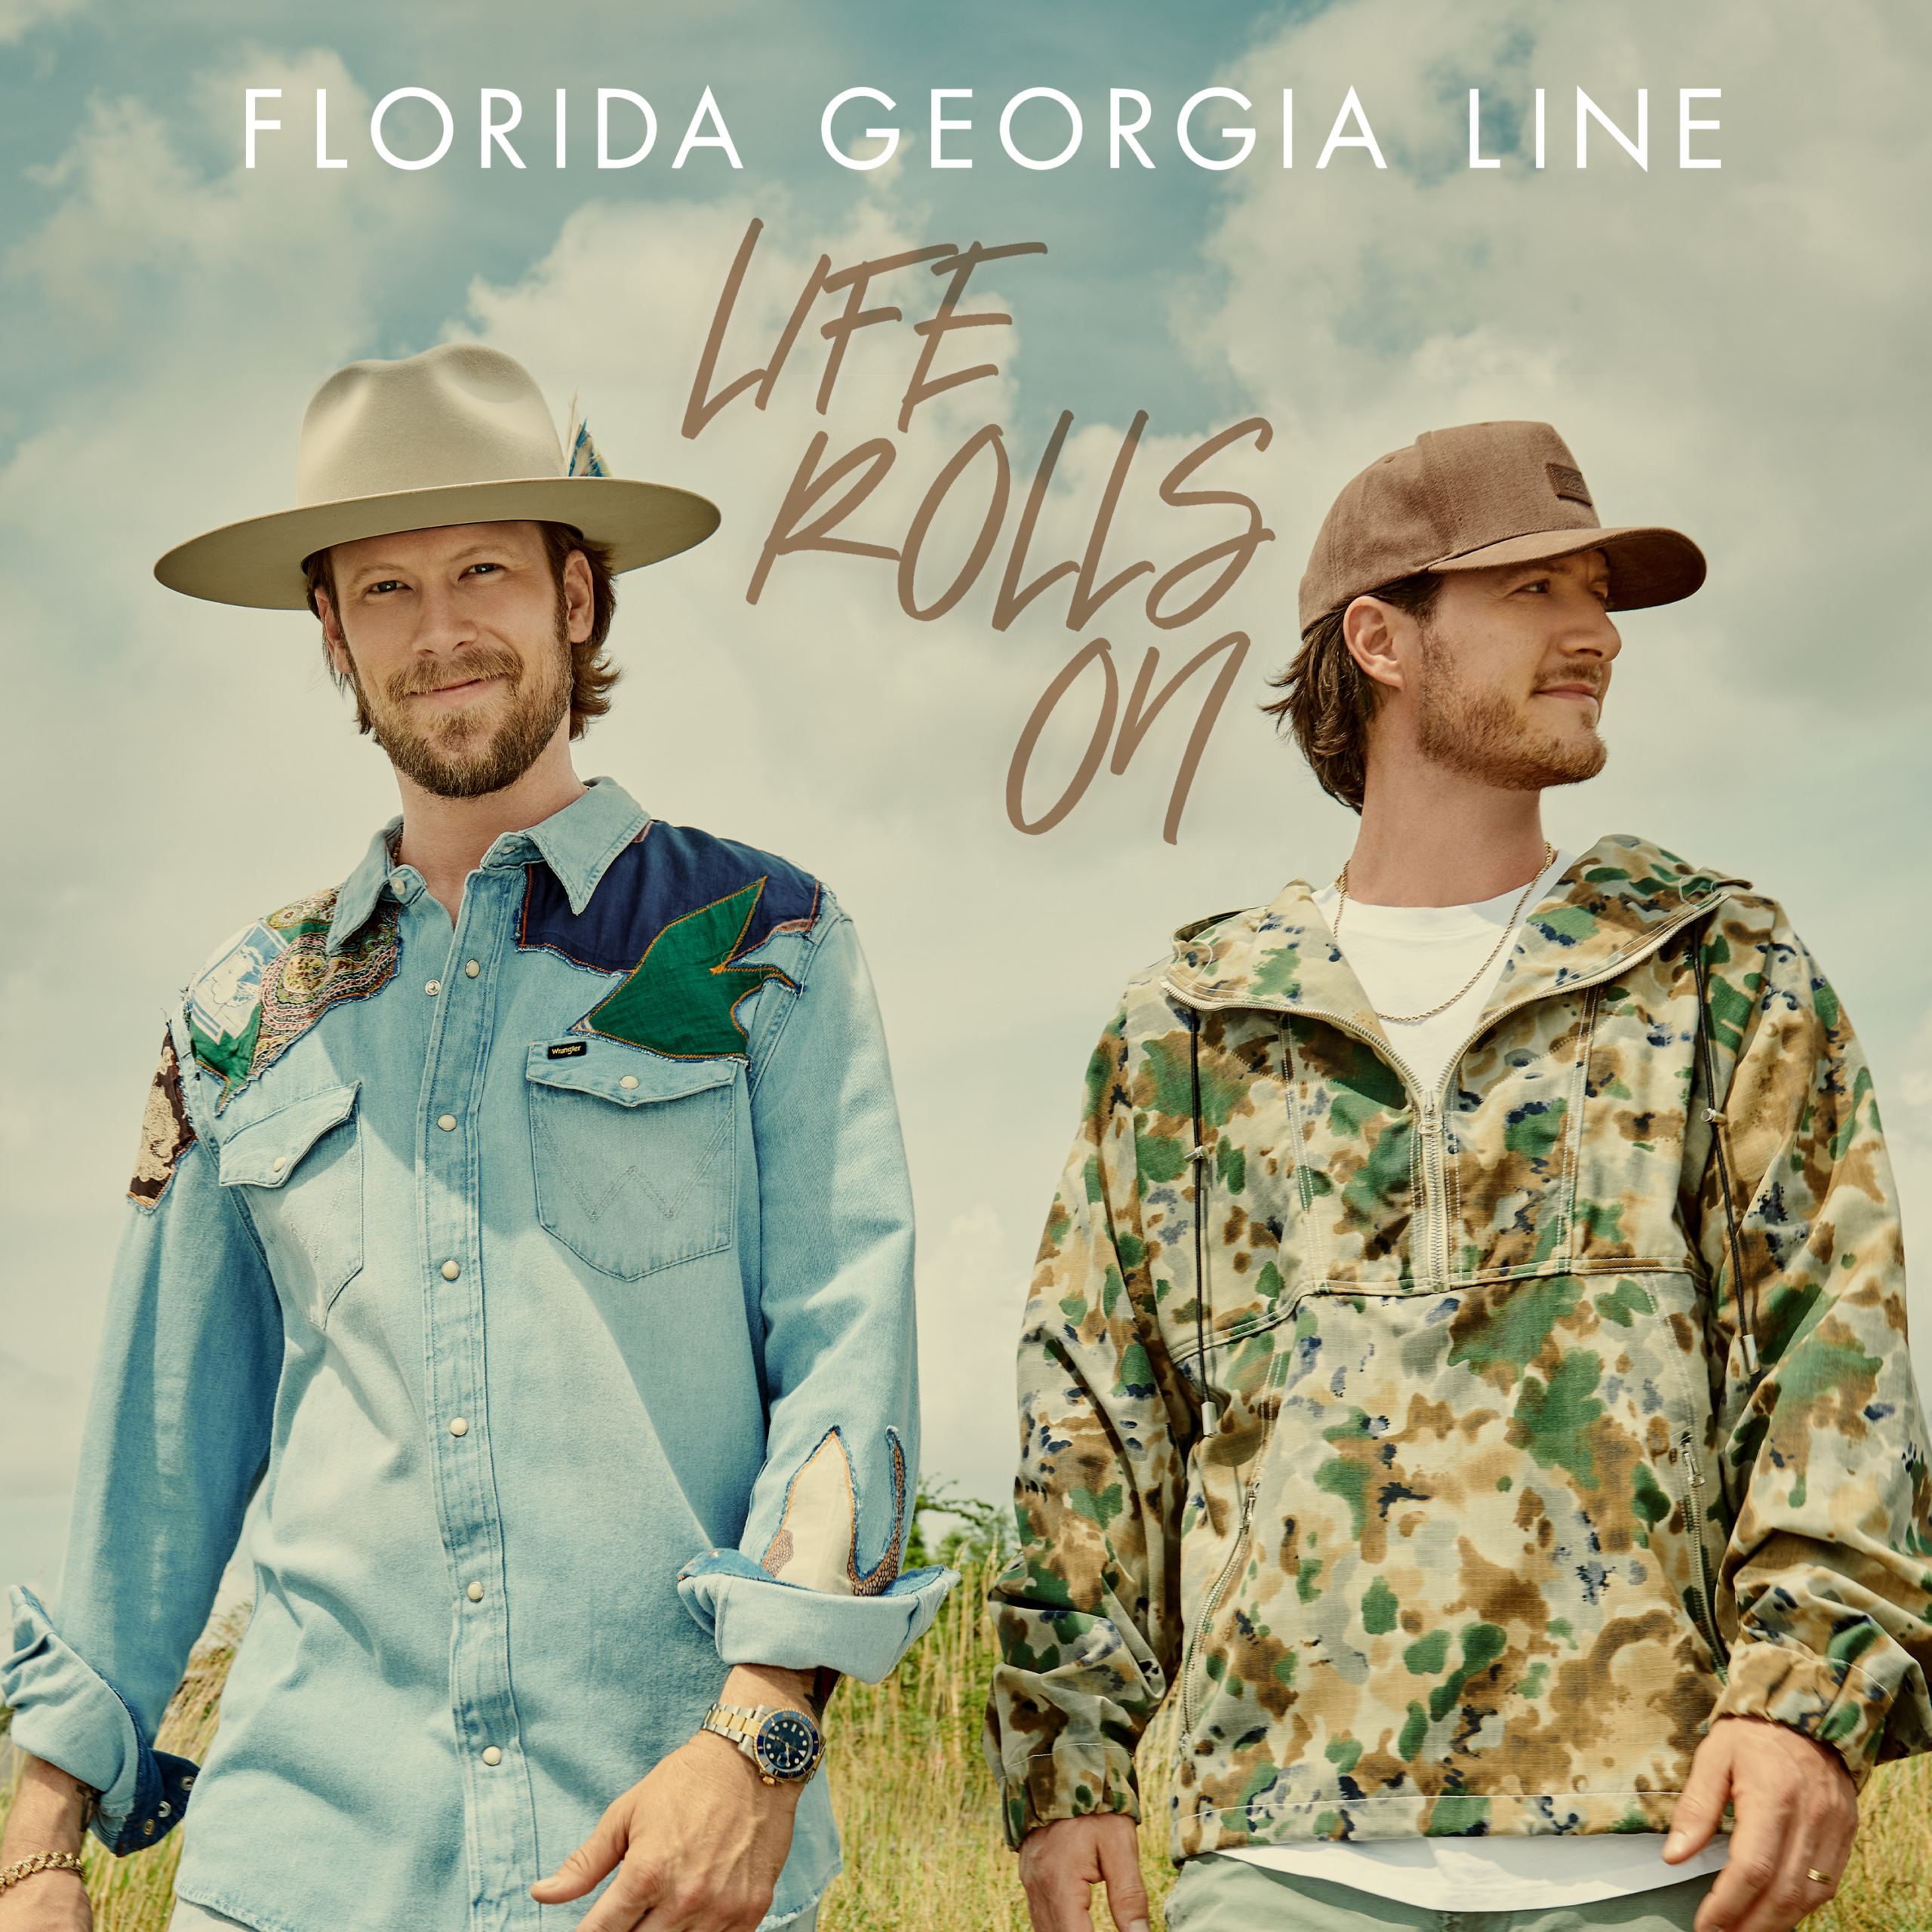 Florida Georgia Line’s New Song “Life Rolls On” is available now